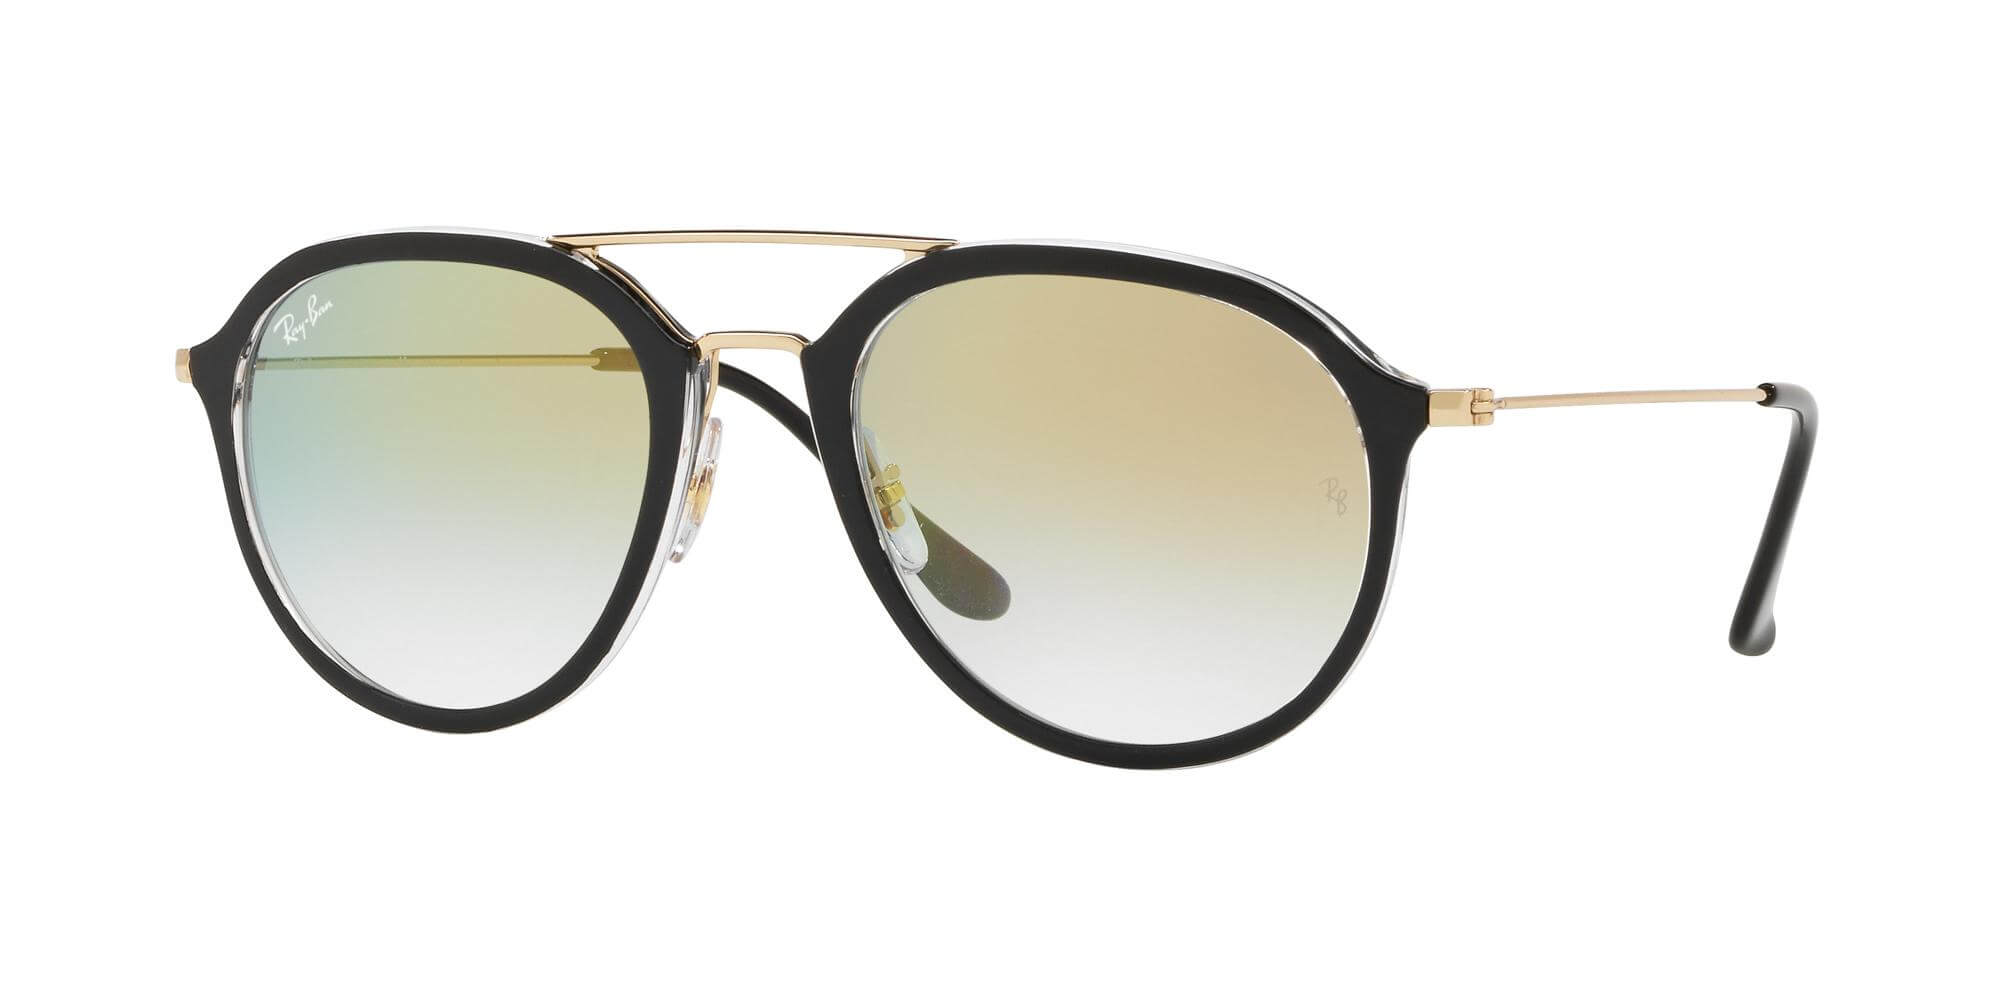 Ray-BanRB 4253Black/gold Shaded (6052/Y0)